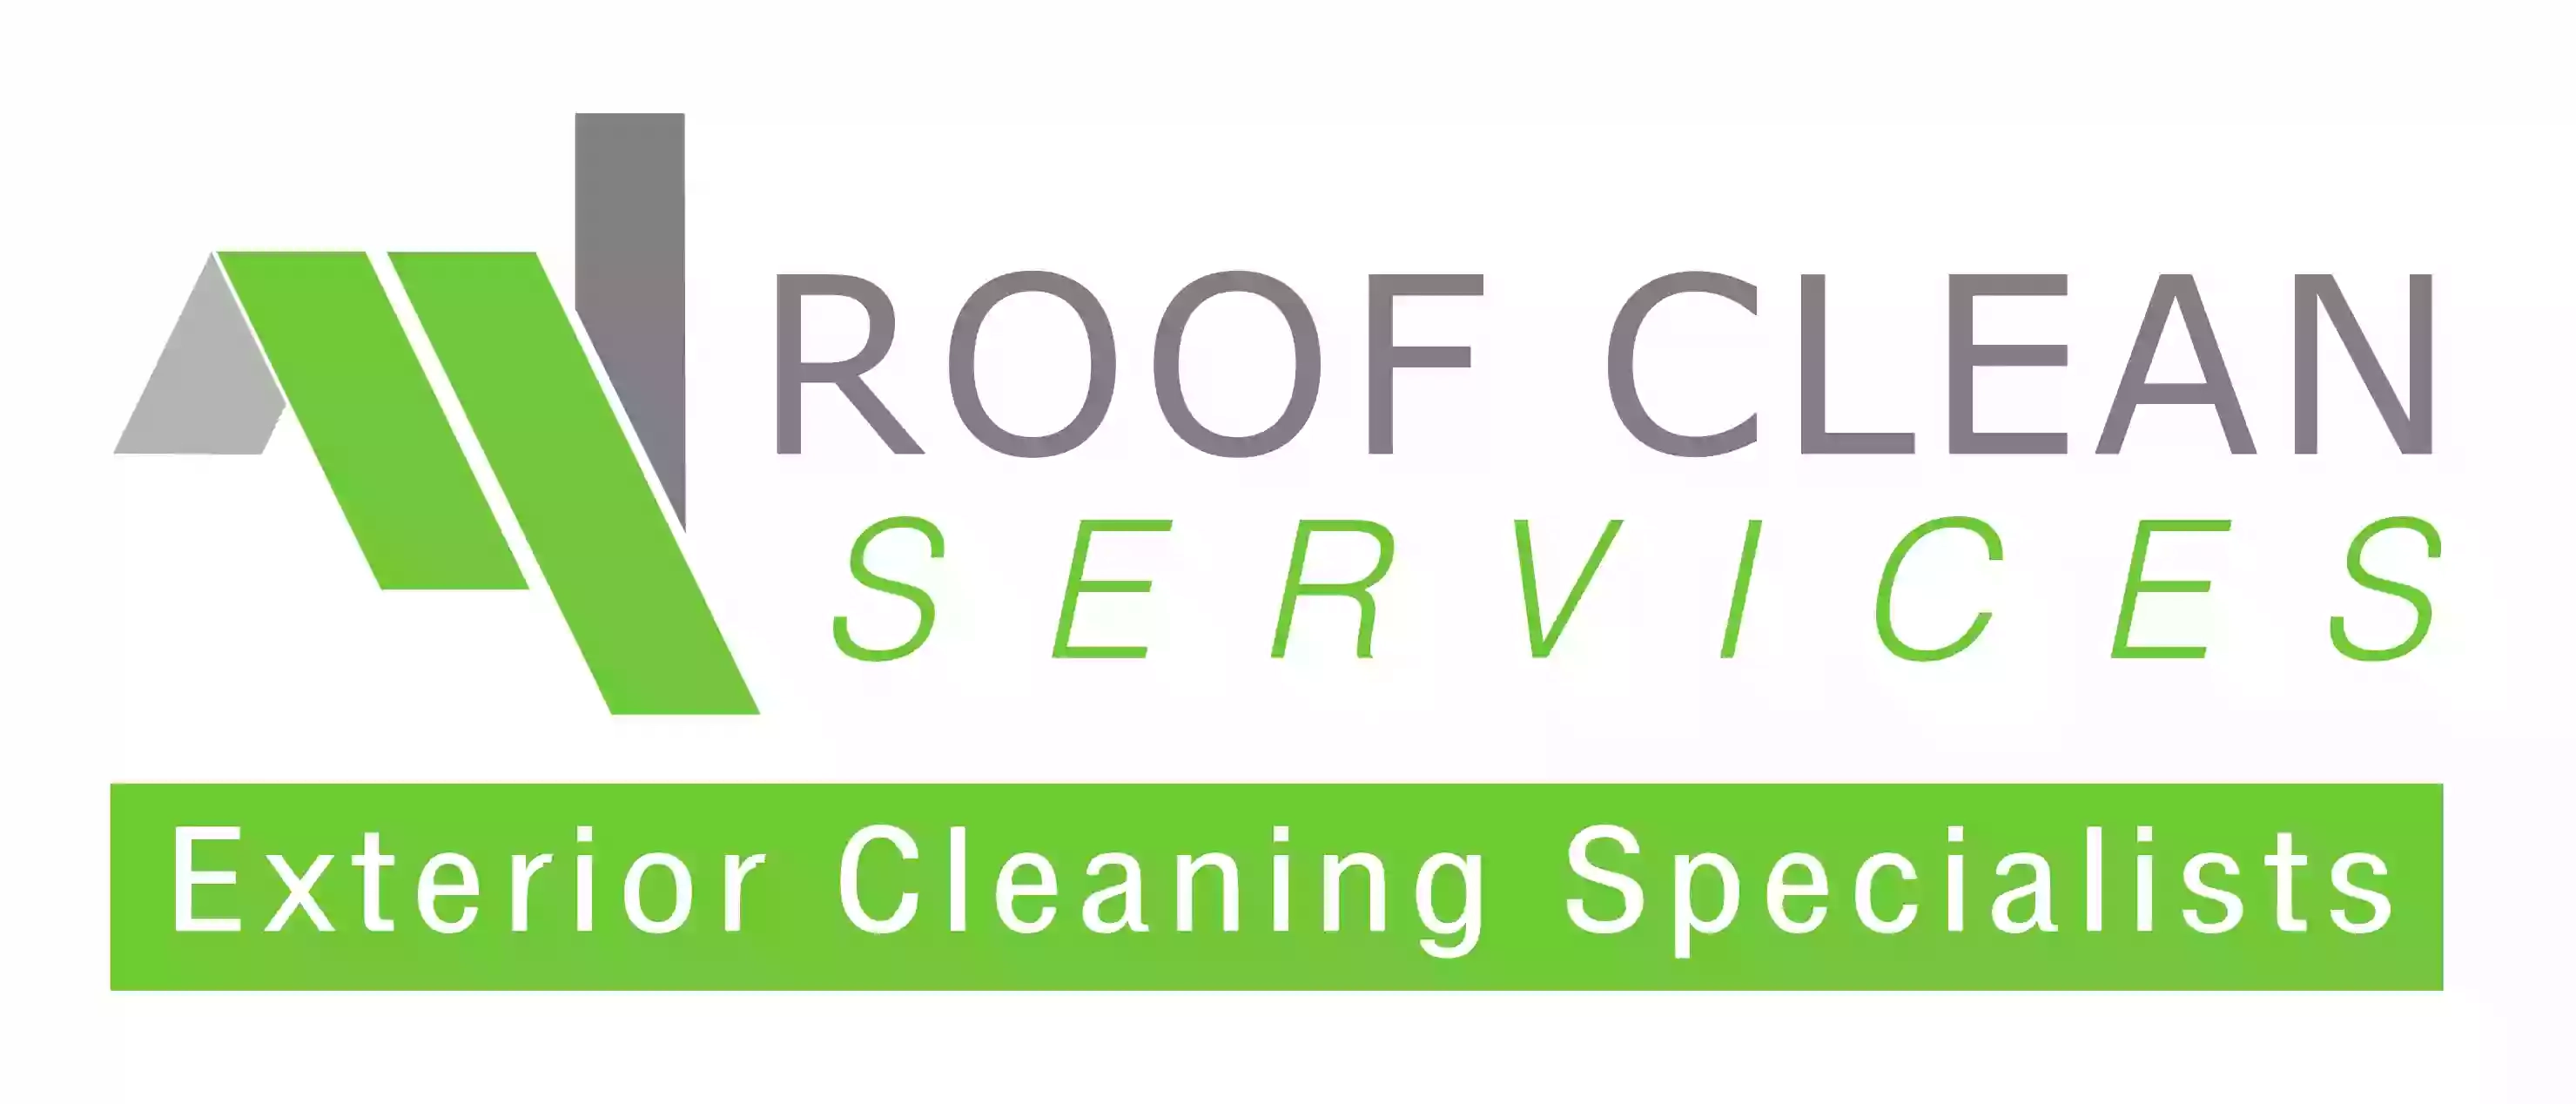 Roof Clean Services - Exterior cleaning specialists